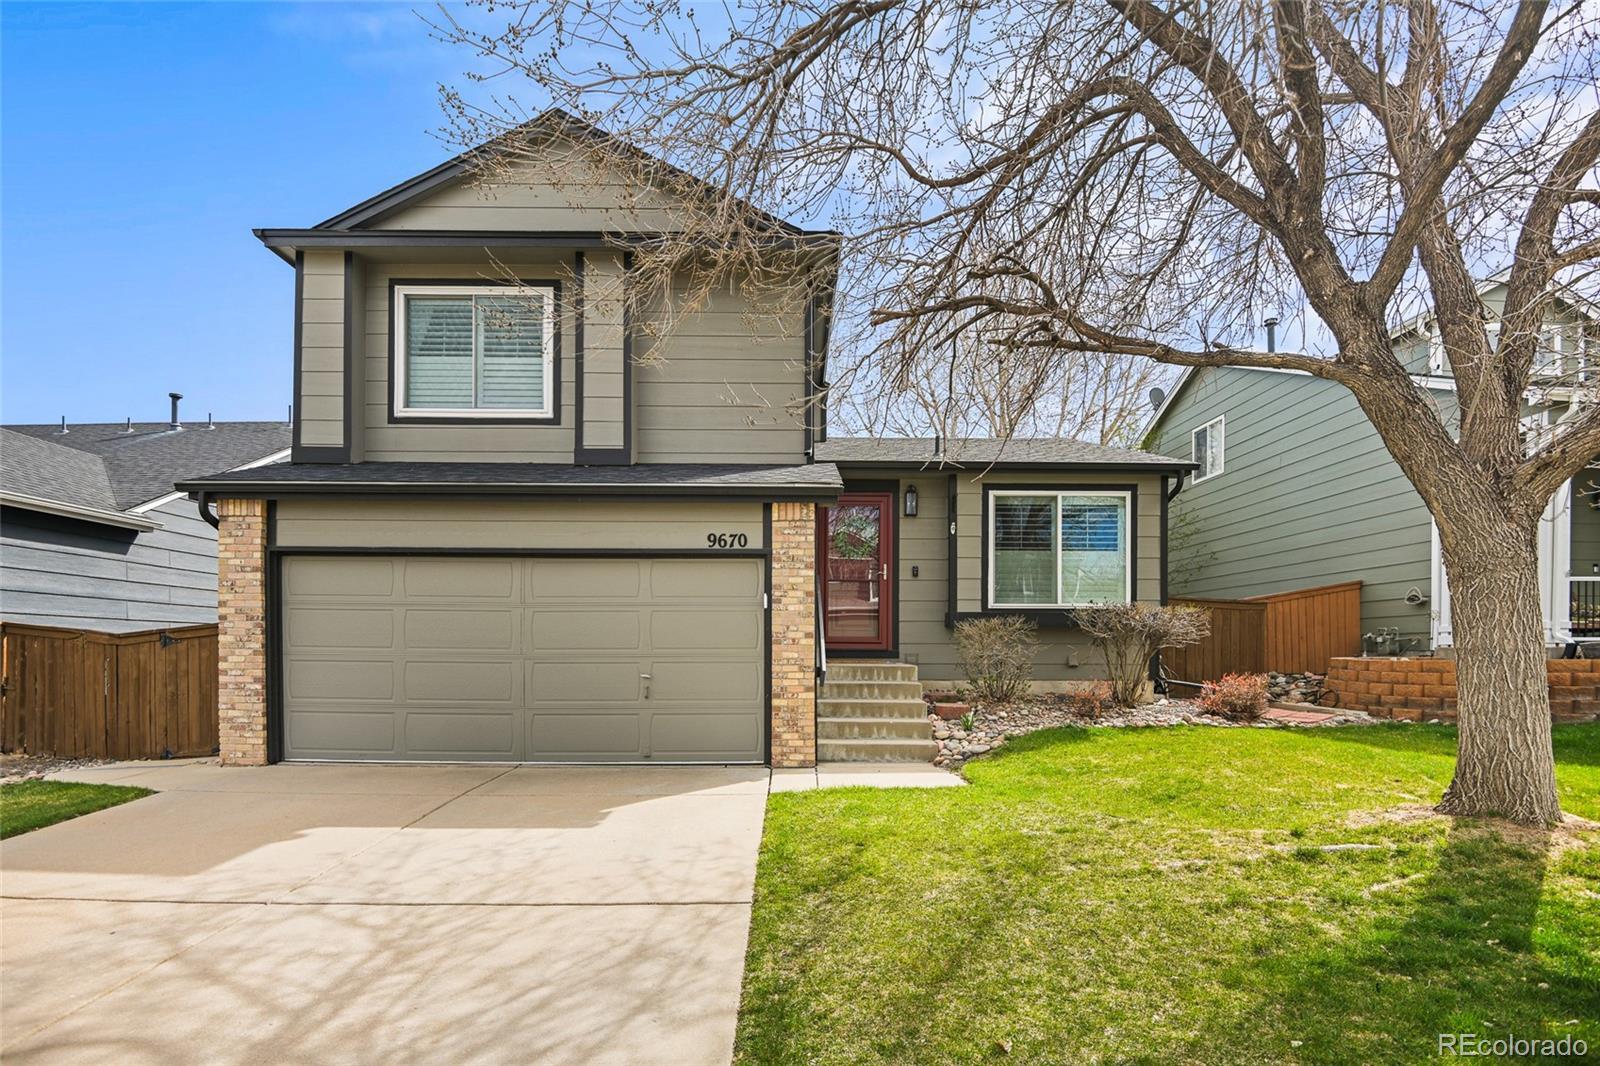 Photo one of 9670 Autumnwood Pl Highlands Ranch CO 80129 | MLS 3388625